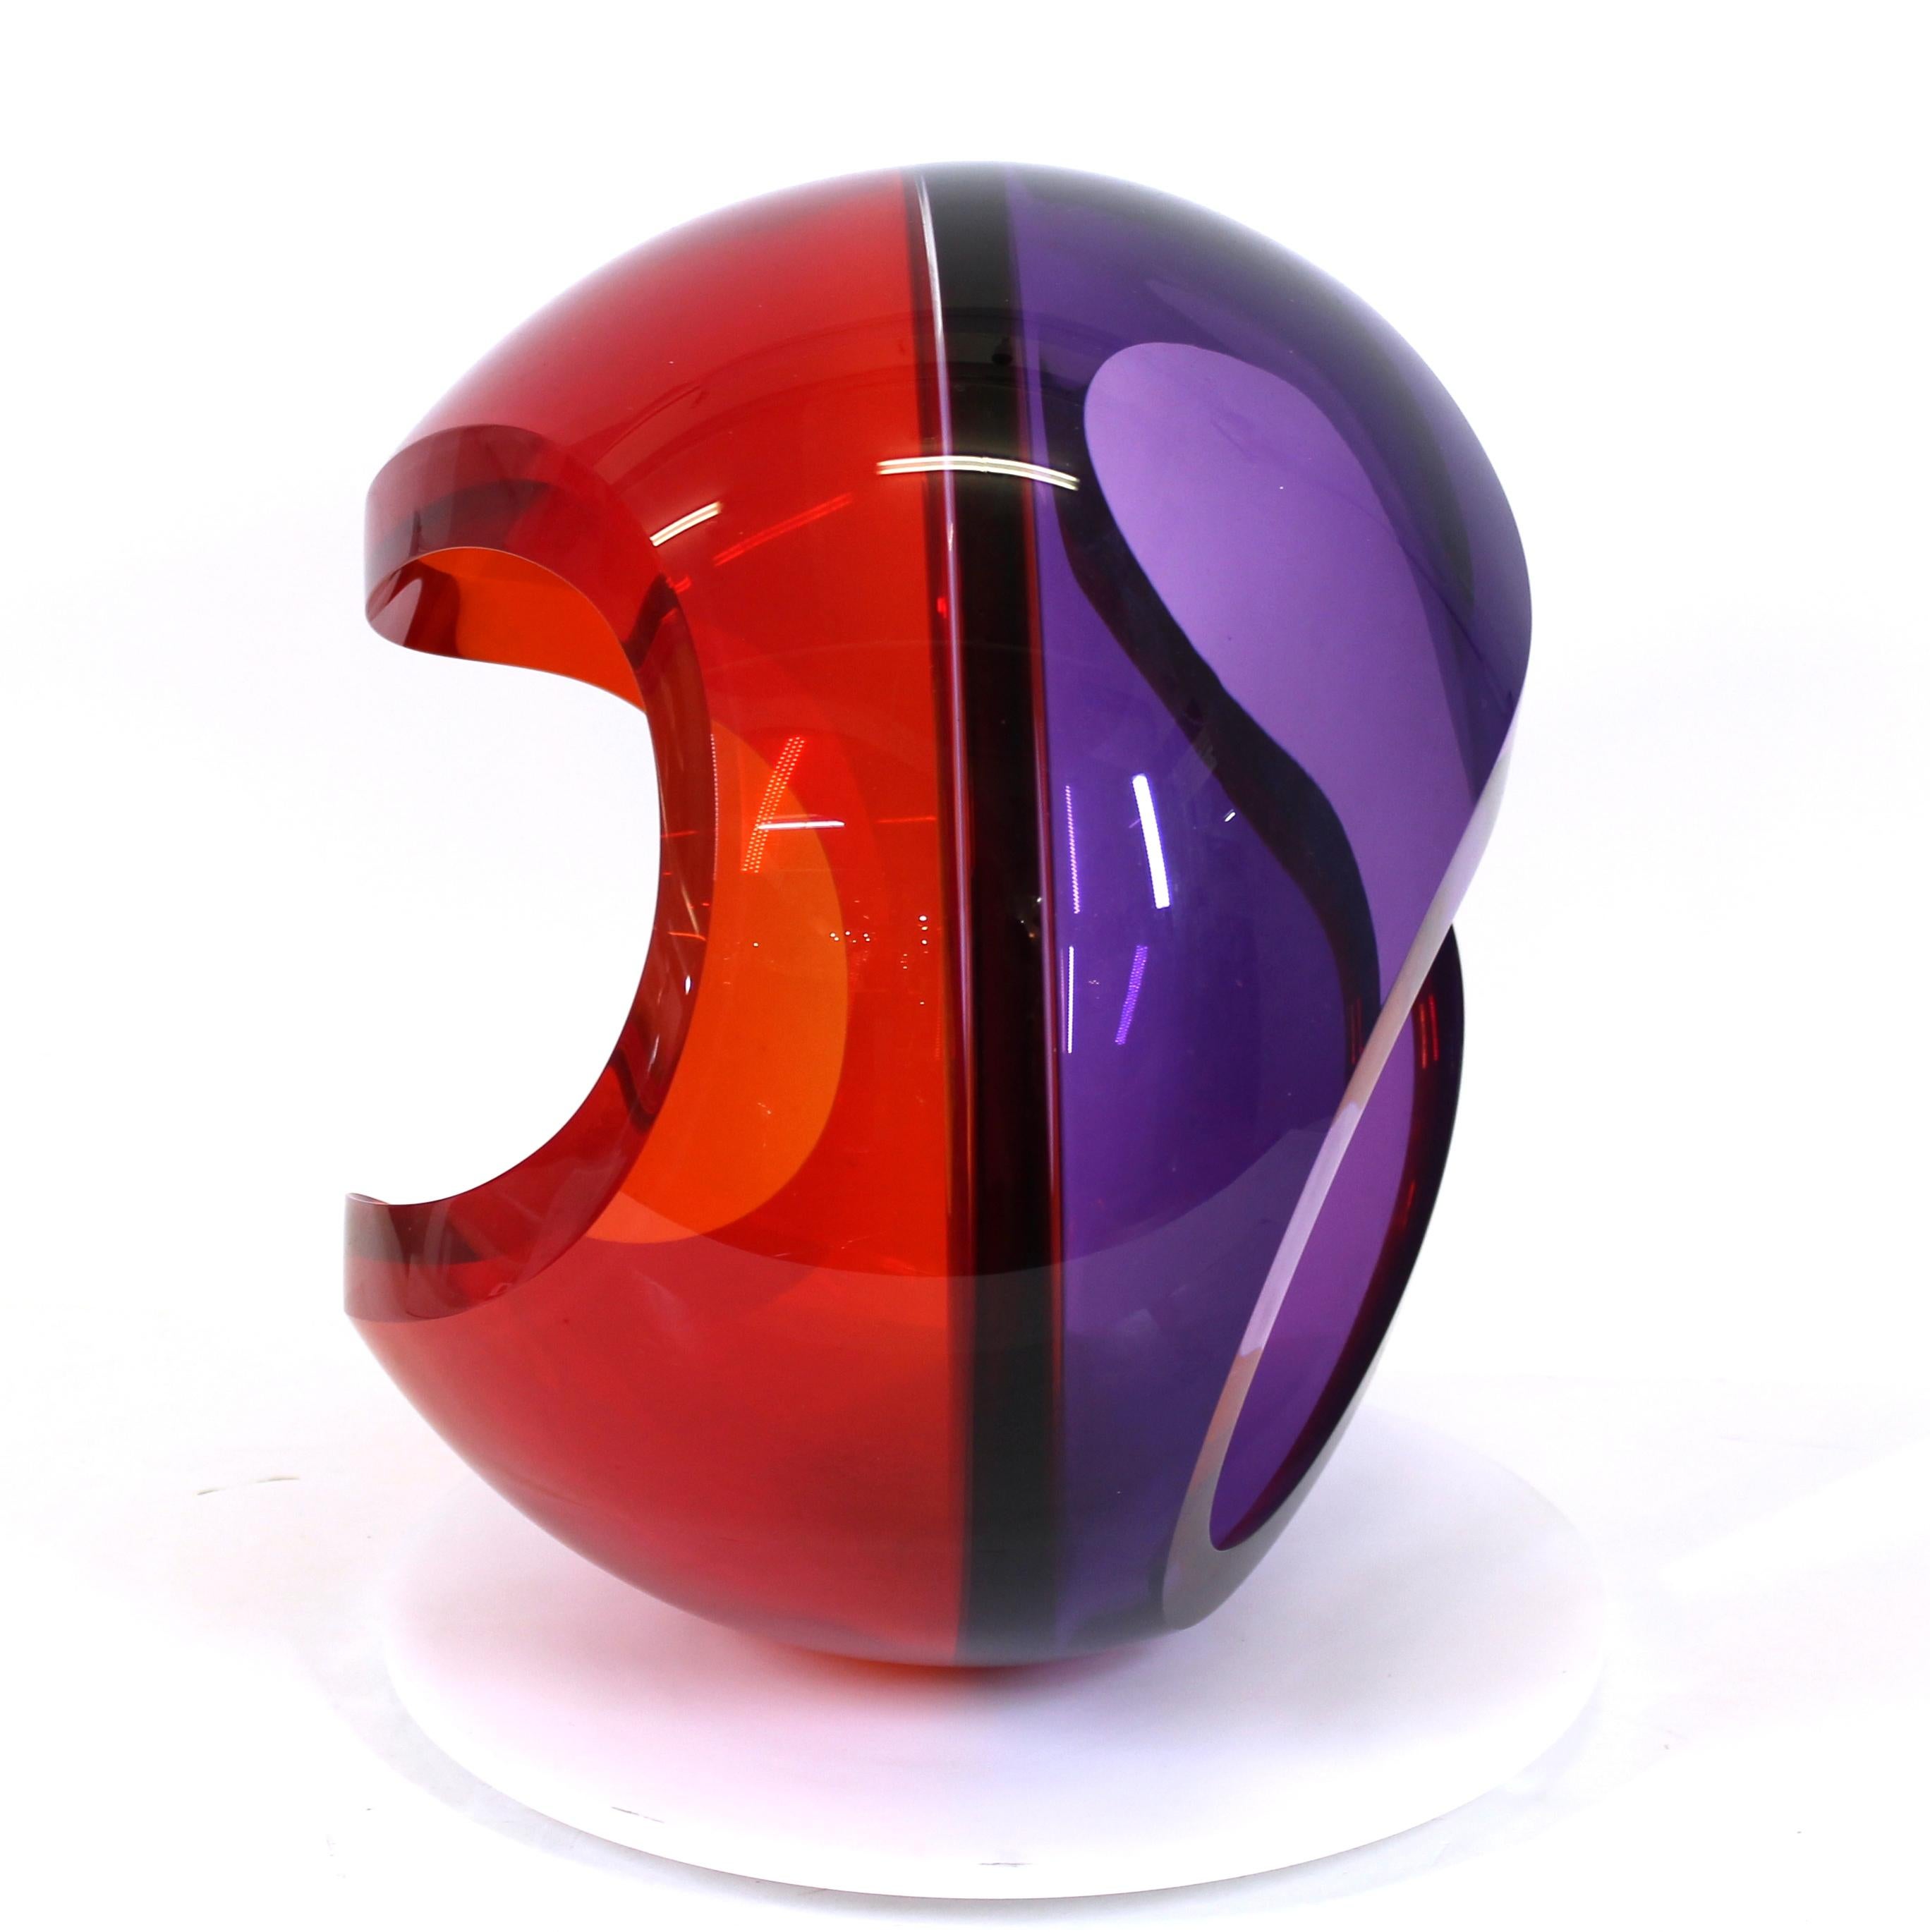 John Kiley (b. 1973) American studio art glass sculpture of a bi-colored glass orb with open sides, mounted on a rotating platform, measures: 16